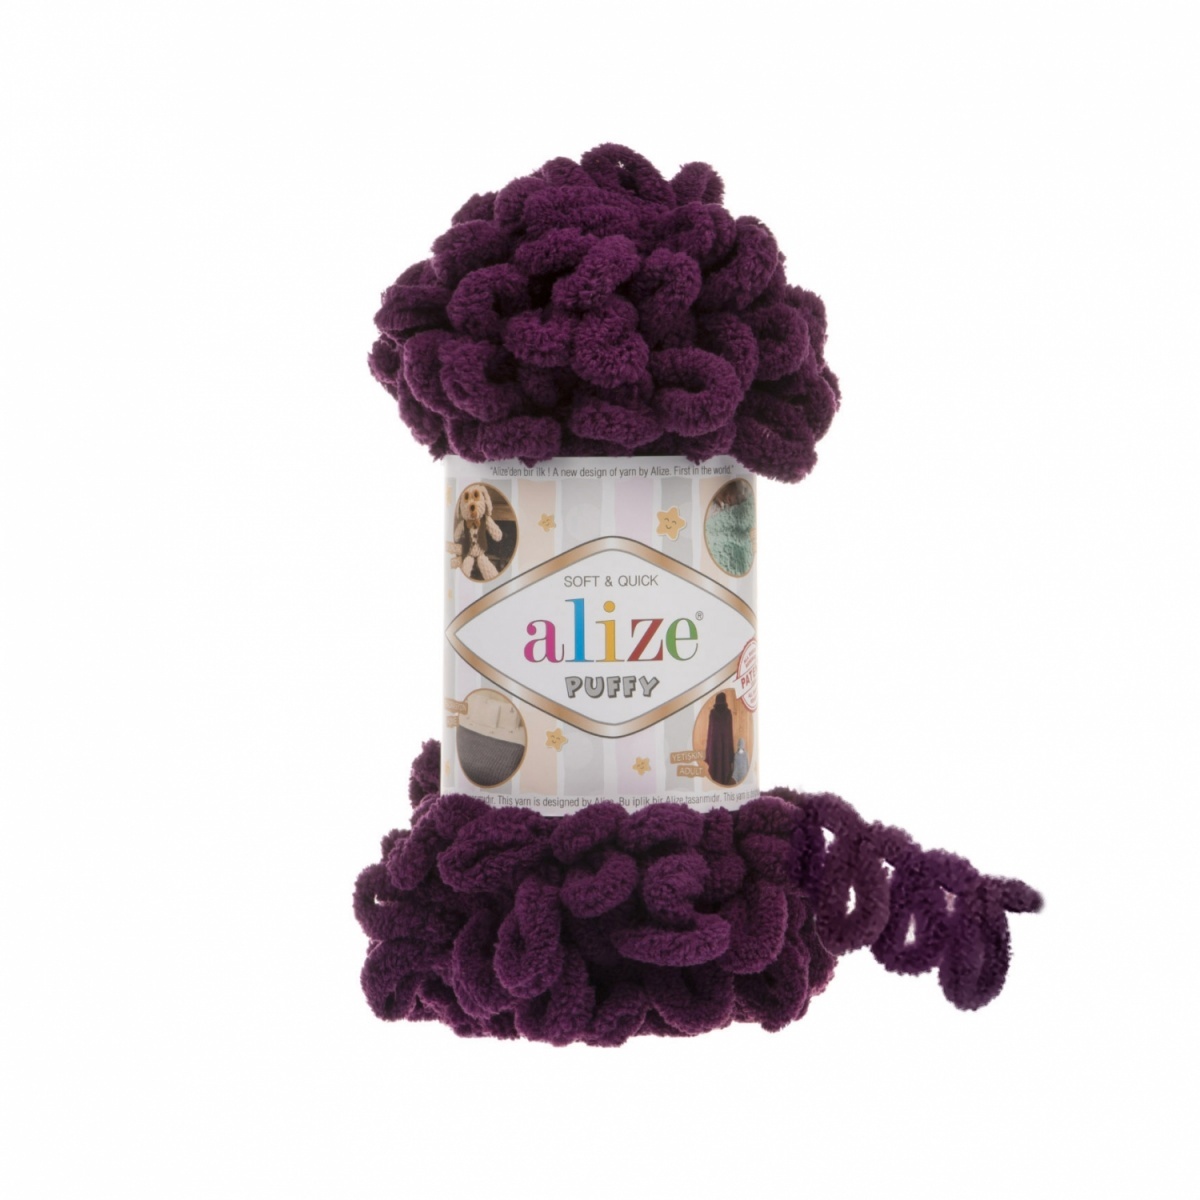 Alize Puffy, 100% Micropolyester 5 Skein Value Pack, 500g фото 22